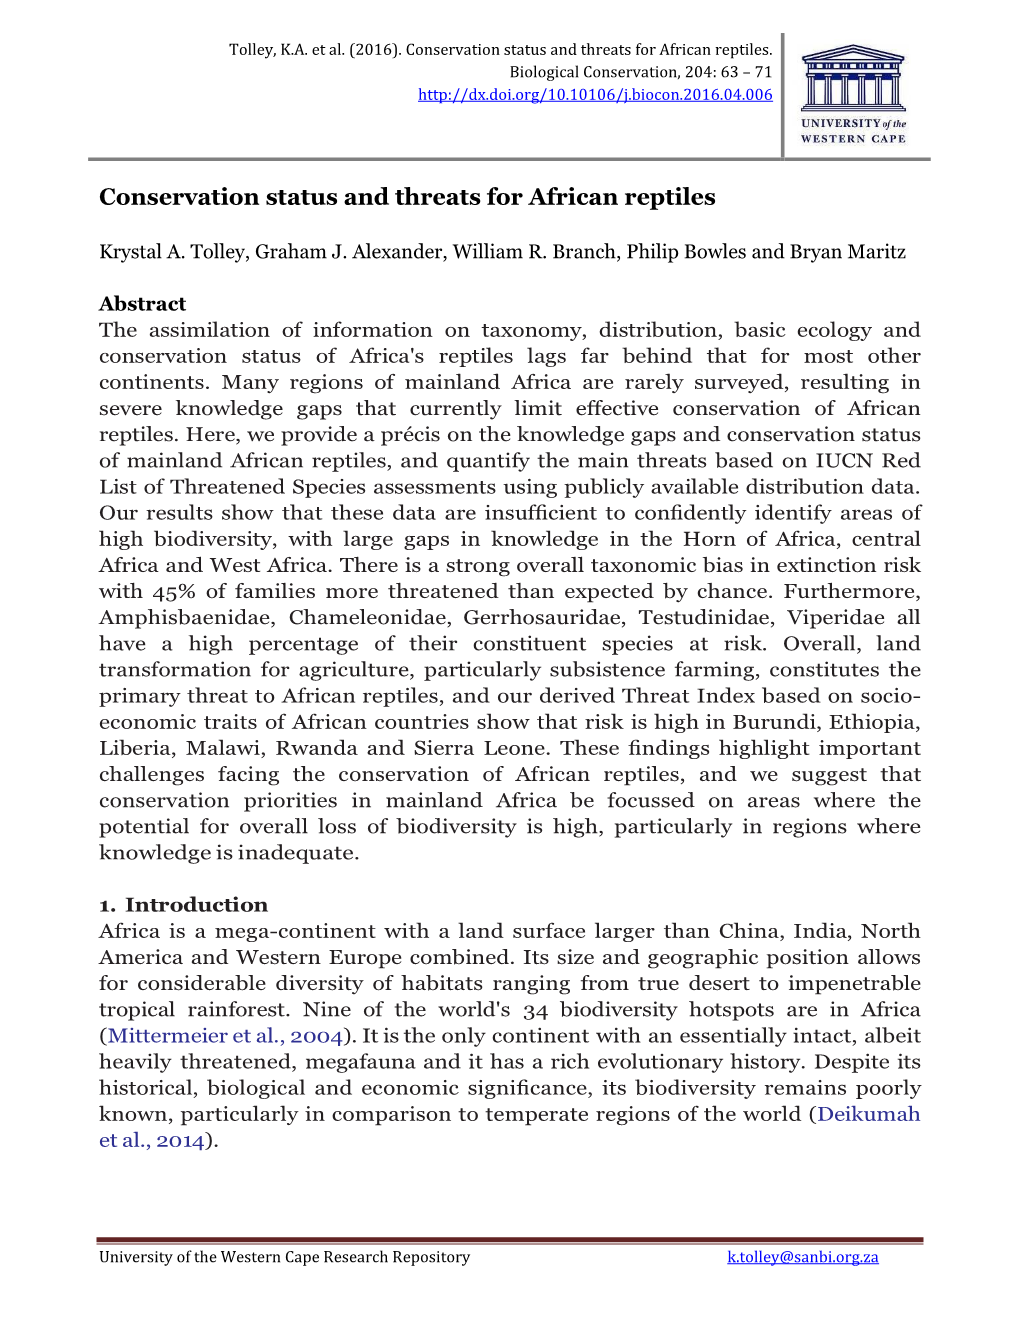 Conservation Status and Threats for African Reptiles